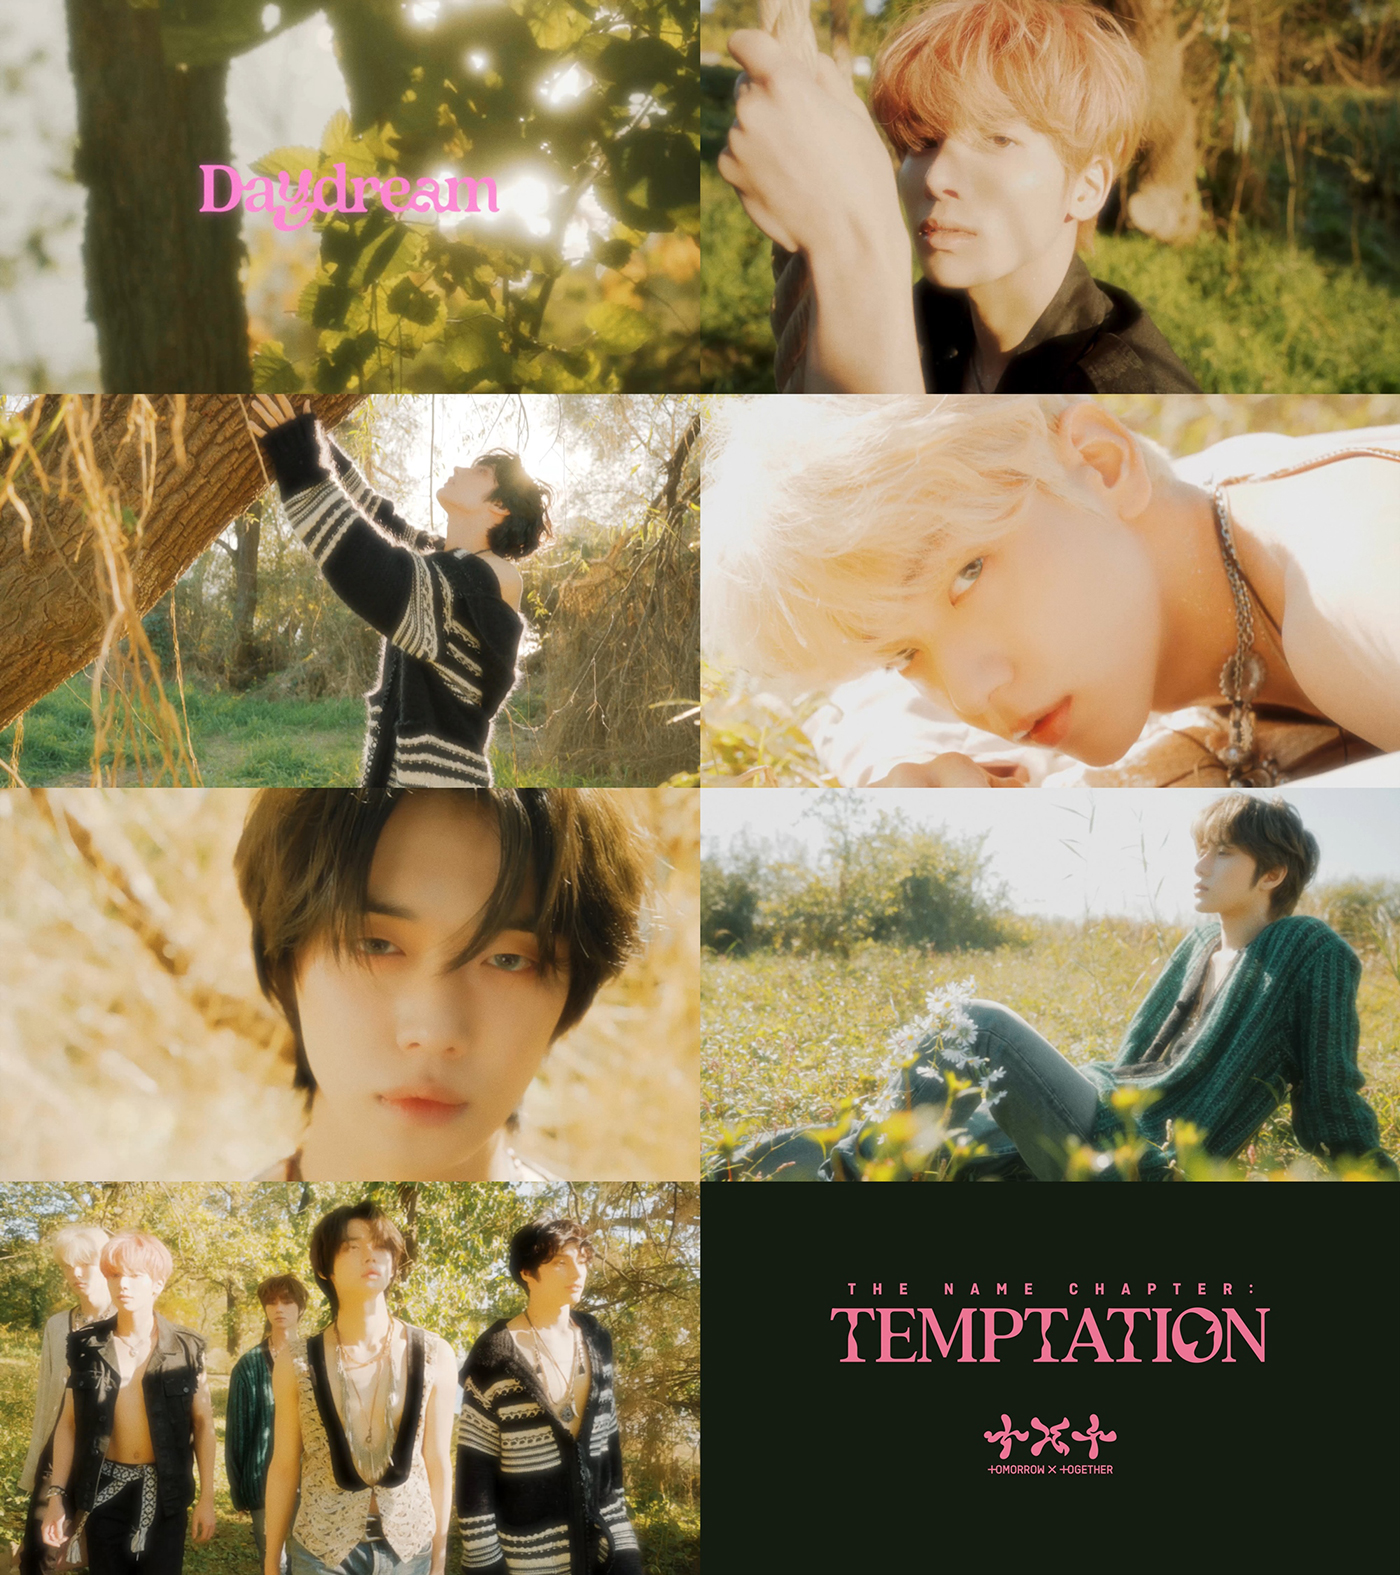 TOMORROW X TOGETHER、ニューアルバム『The Name Chapter: TEMPTATION』のコンセプトクリップ公開